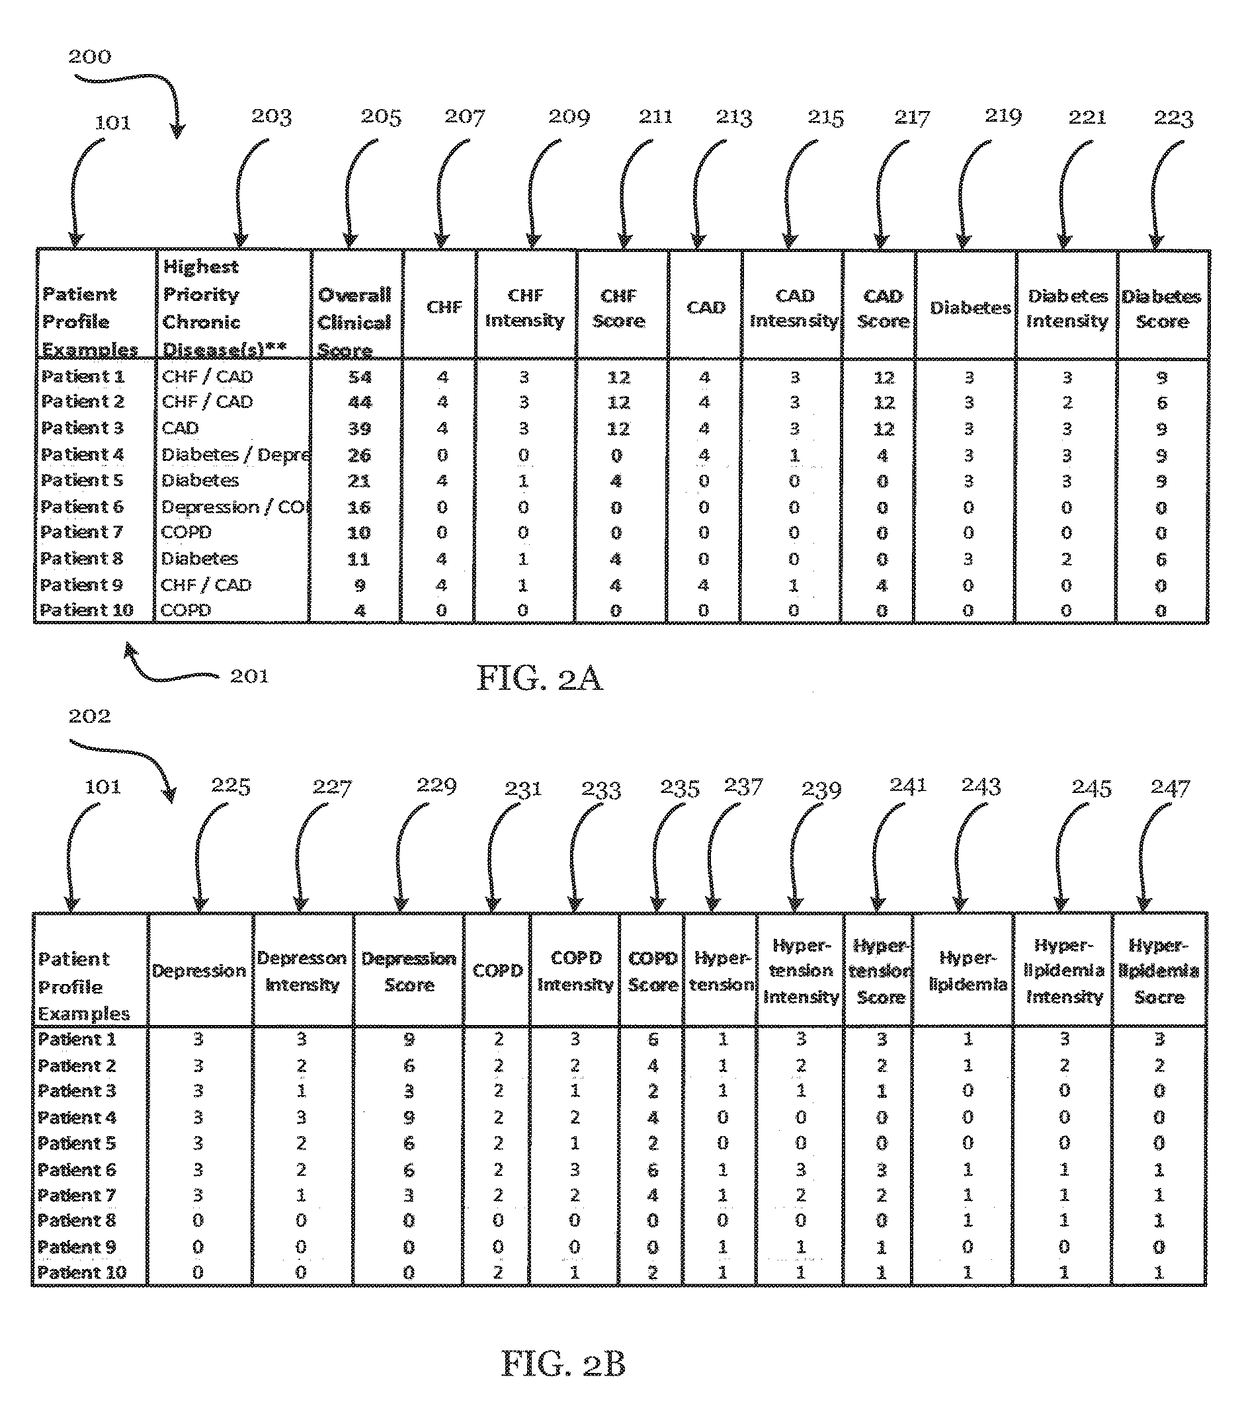 Systems and Methods For Performing Health Risk Assessments and Risk Stratification On A Patient Population